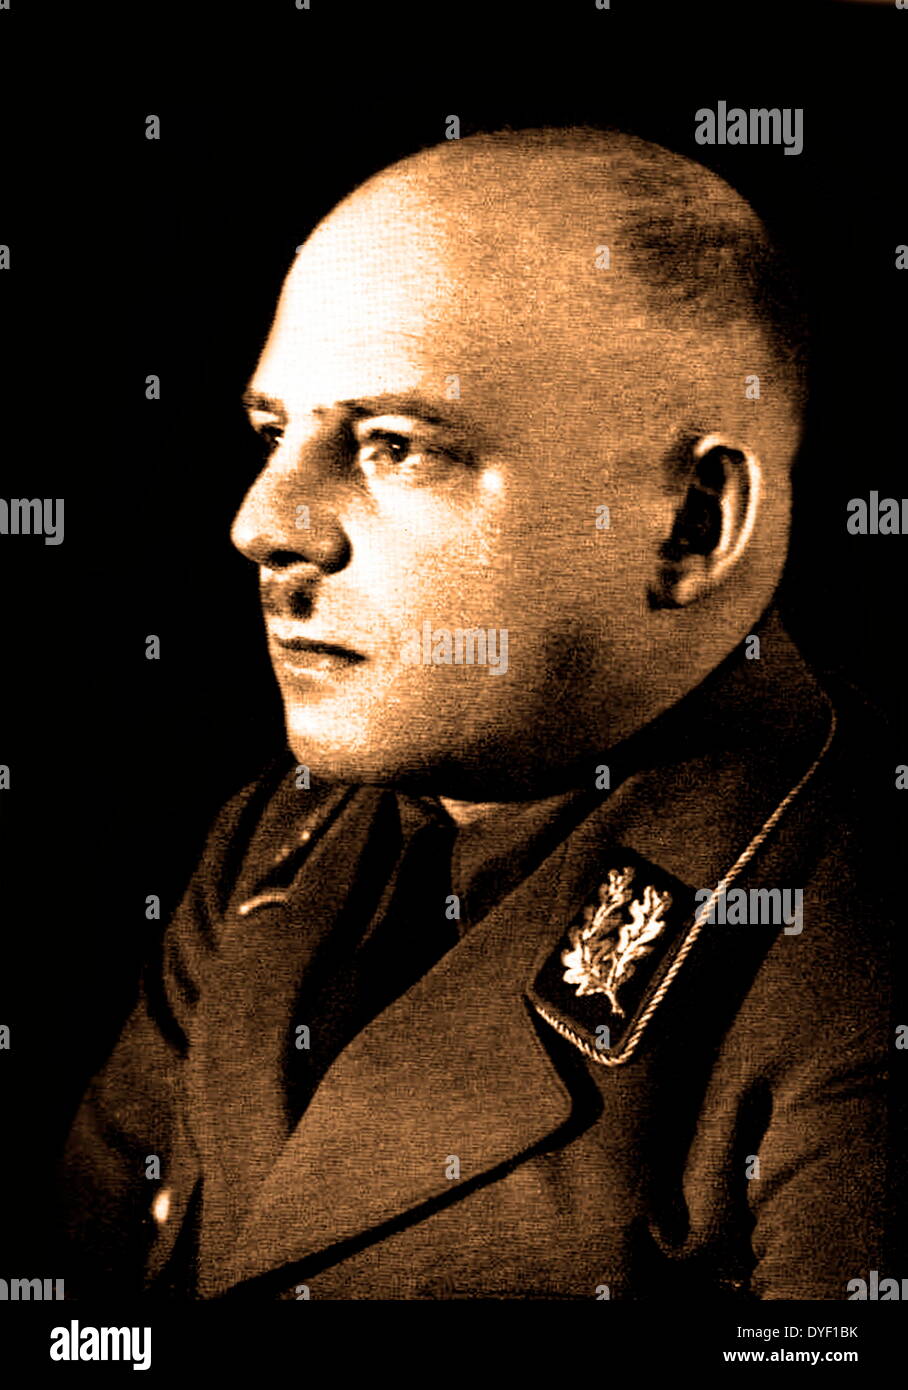 Photographic portrait of Ernst Friedrich Christoph 'Fritz' Sauckel. A Nazi war criminal, who organized the systematic enslavement of millions from lands occupied by Nazi Germany. Lived between 27th October 1894 – 16h October 1946. Stock Photo